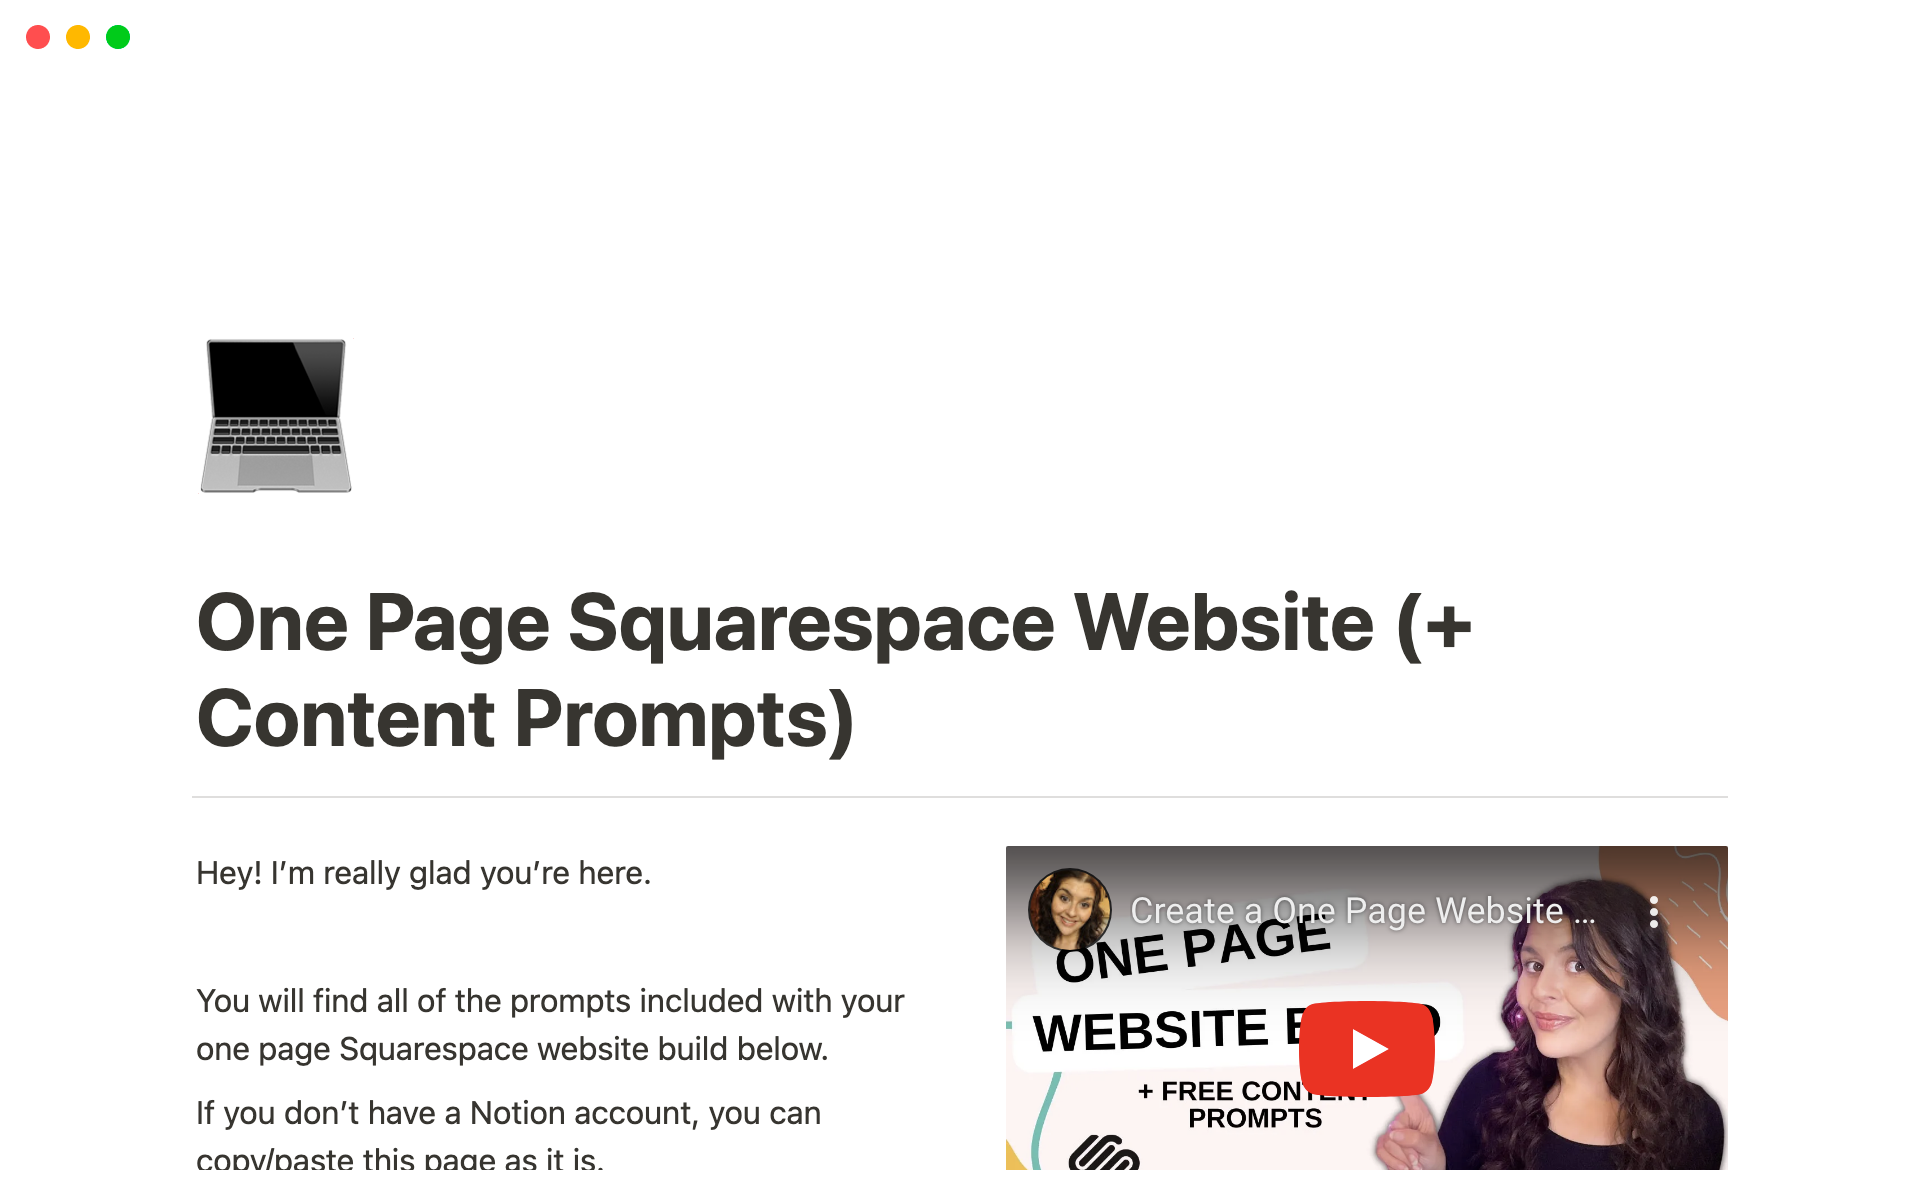 Build and Launch your Squarespace Website (Includes Tutorial and Content Prompts)